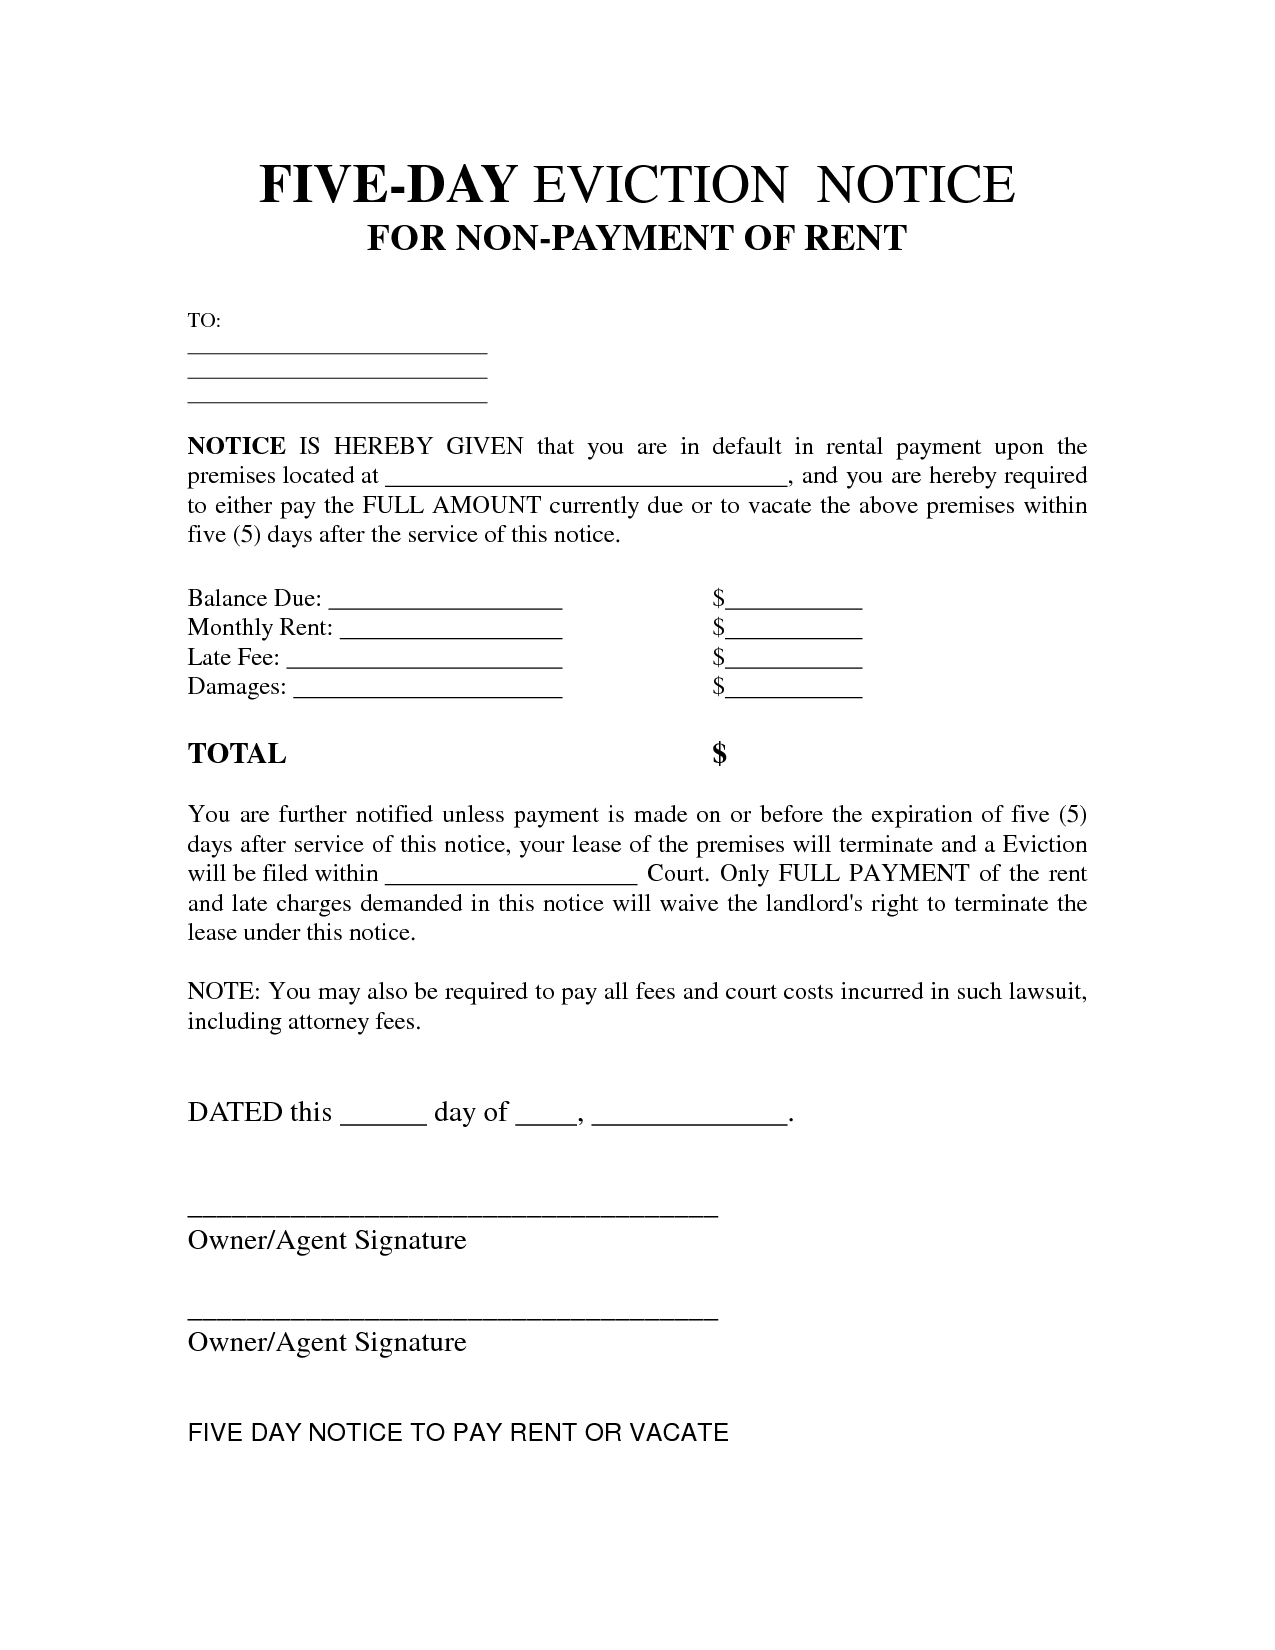 5 Day Eviction Notice Template Image